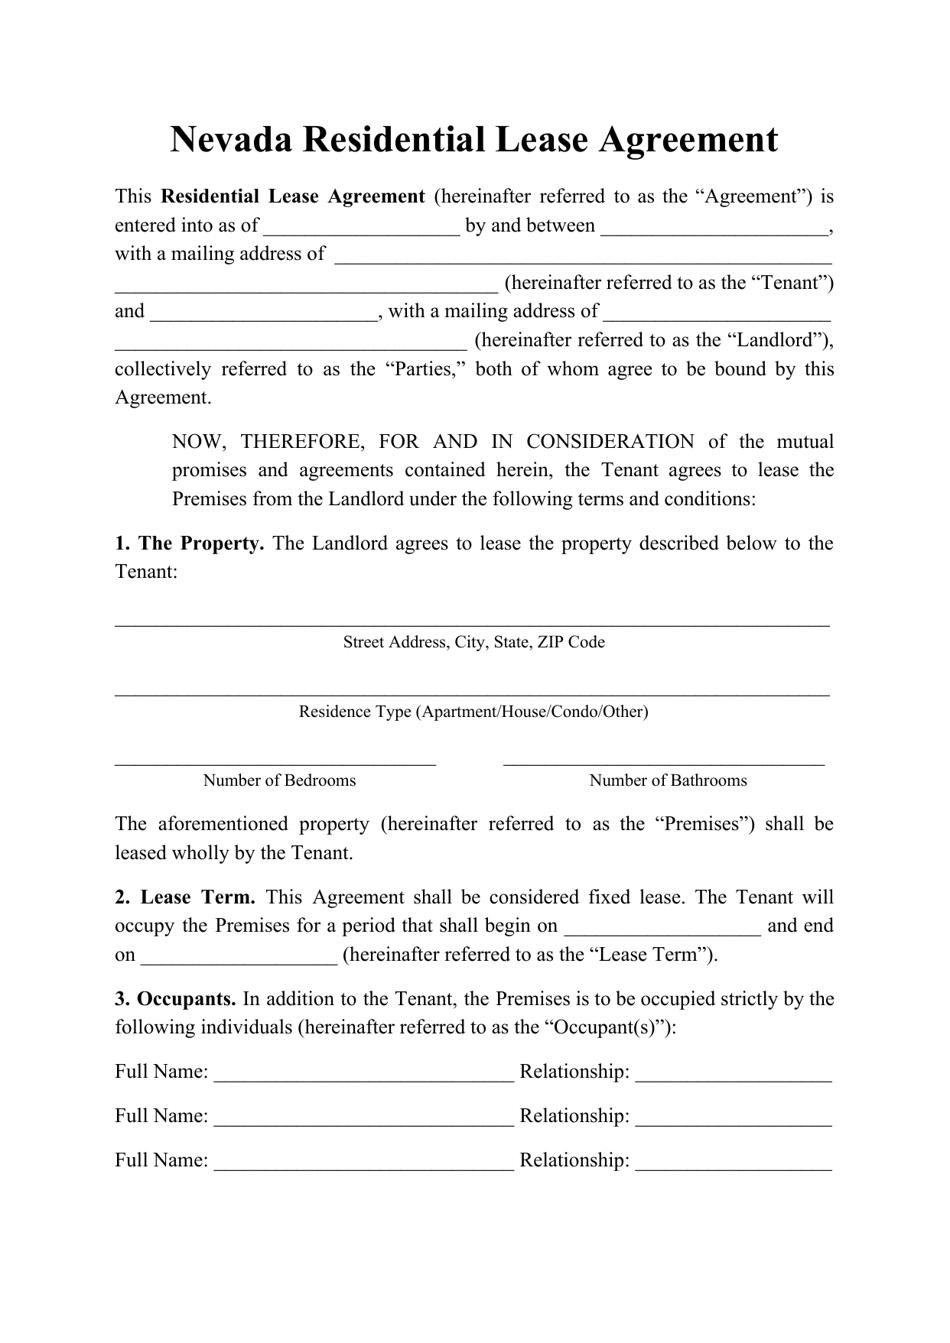 Nevada Residential Lease Agreement Template Fill Out Sign Online and